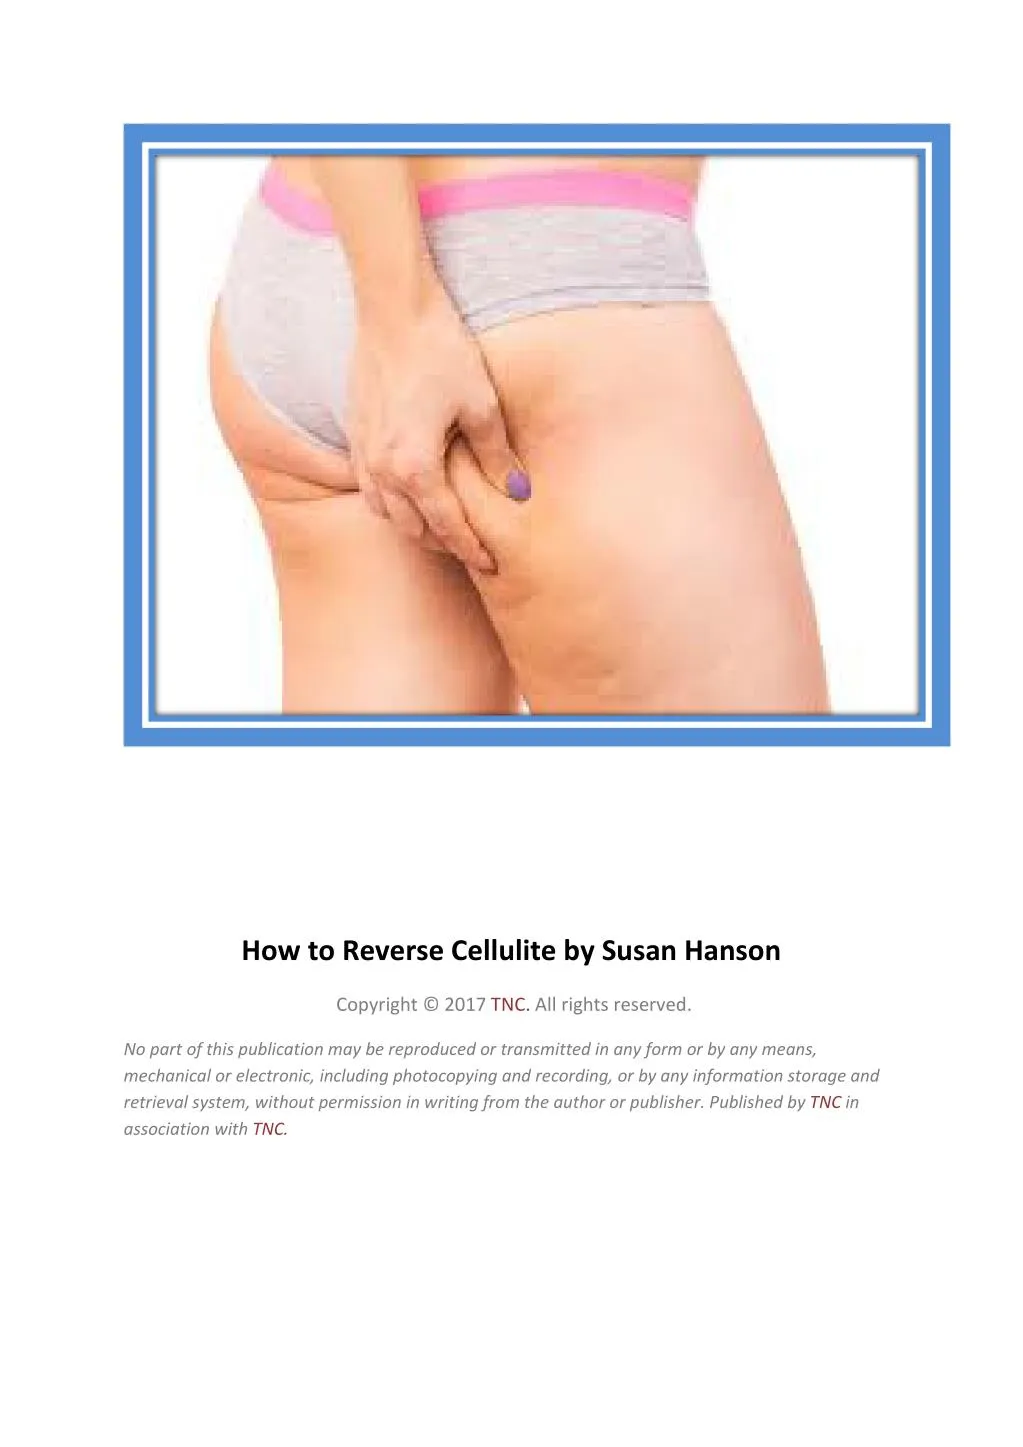 how to reverse cellulite by susan hanson